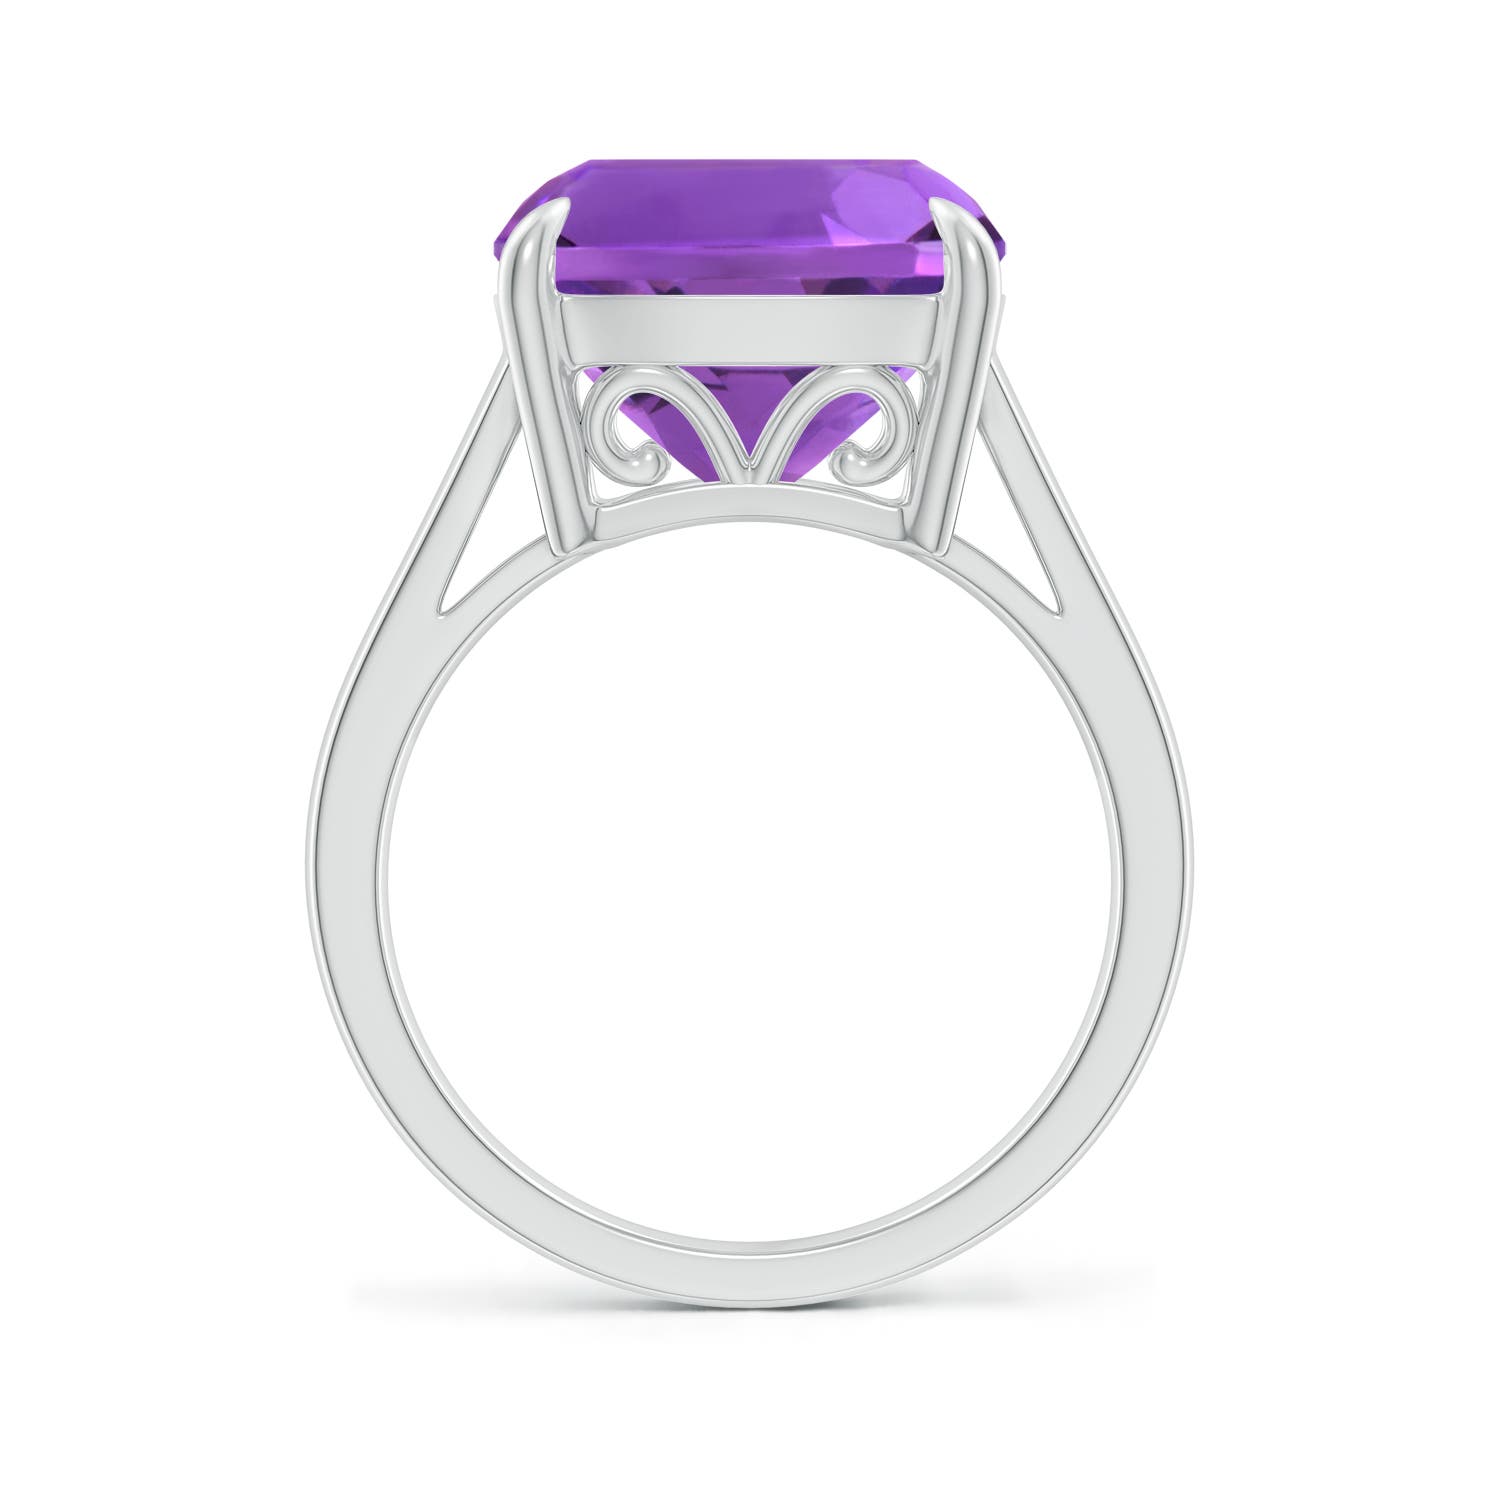 AAA - Amethyst / 6.15 CT / 14 KT White Gold